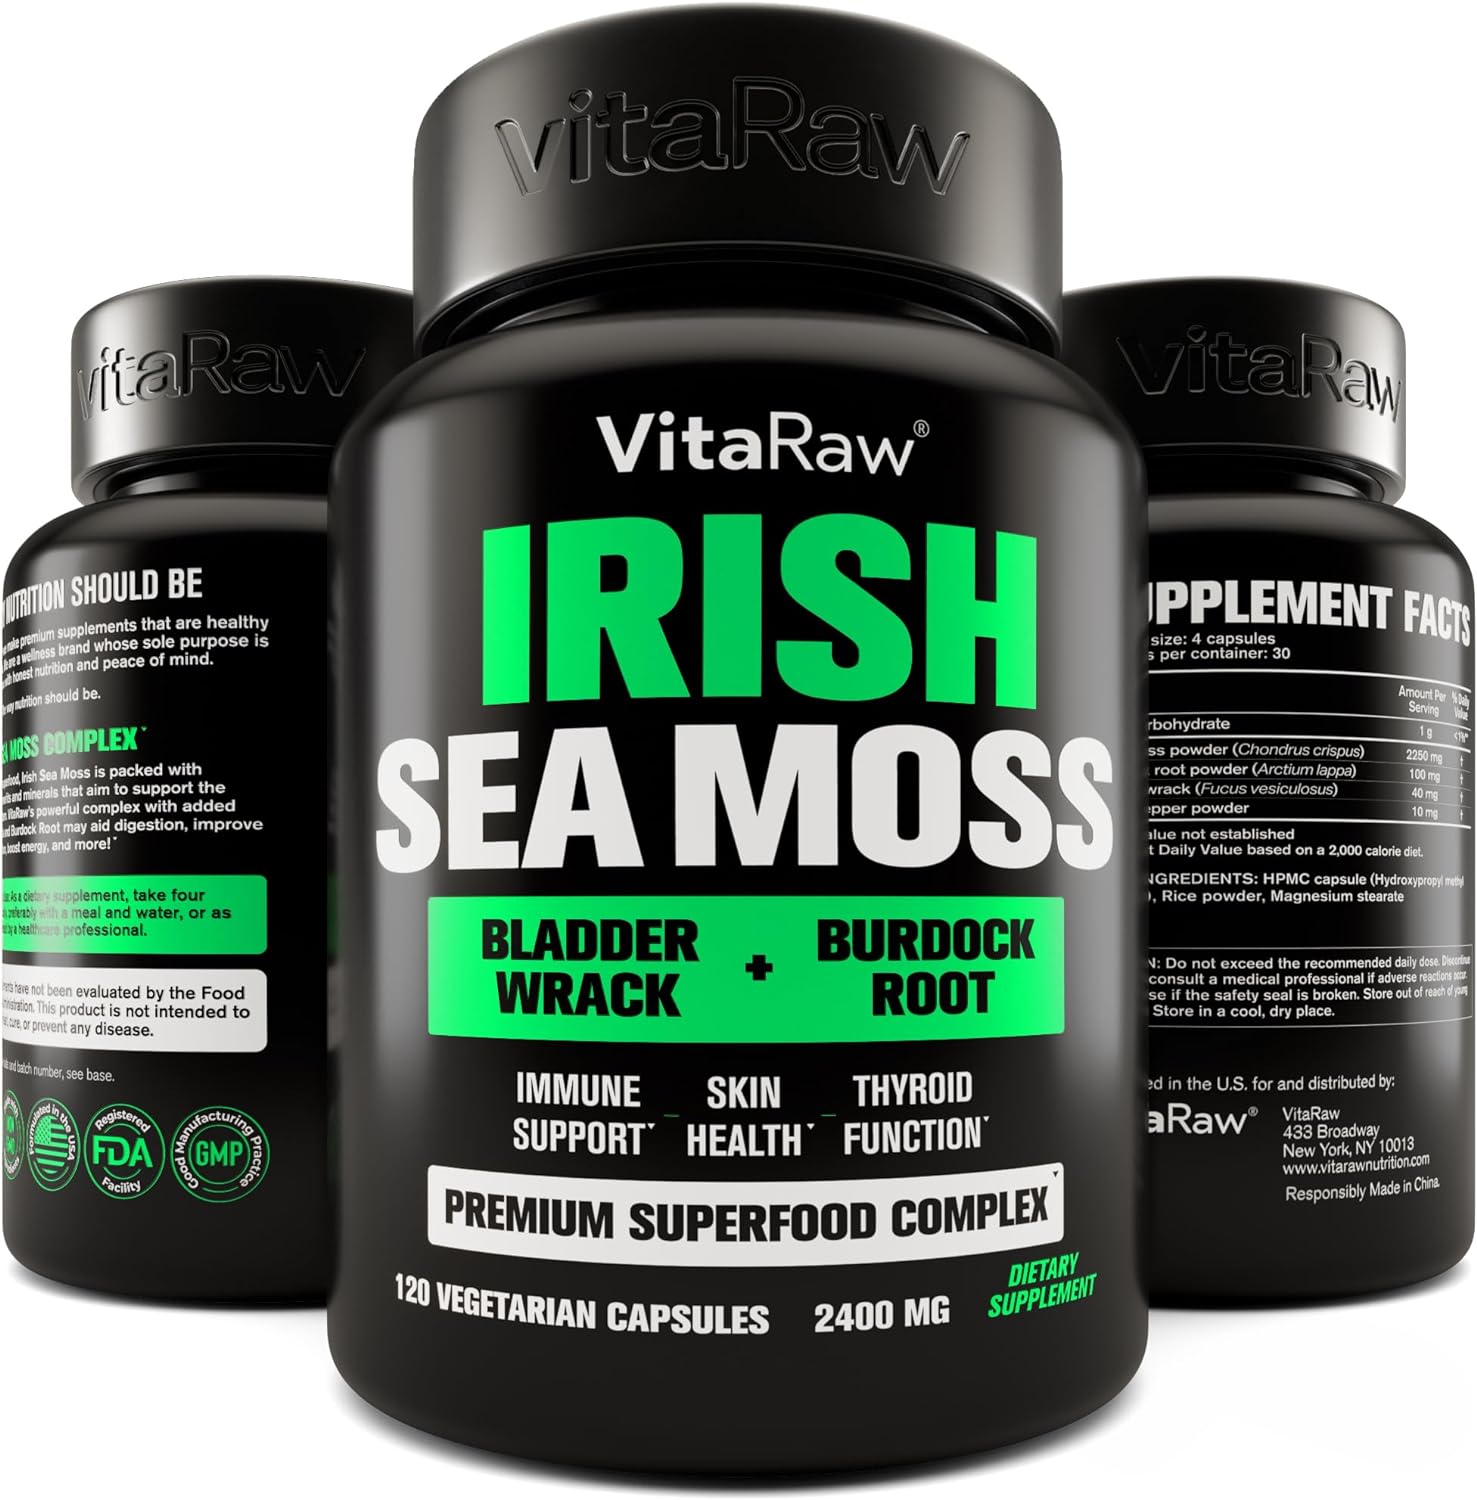 Organic Irish Sea Moss Capsules 2400 mg - Burdock Root and Bladderwrack Powder Real Seamoss Pills for Immune Support, Joint and Gut Health Help - Raw Sea Moss Advanced Herbal Supplement - USA Made